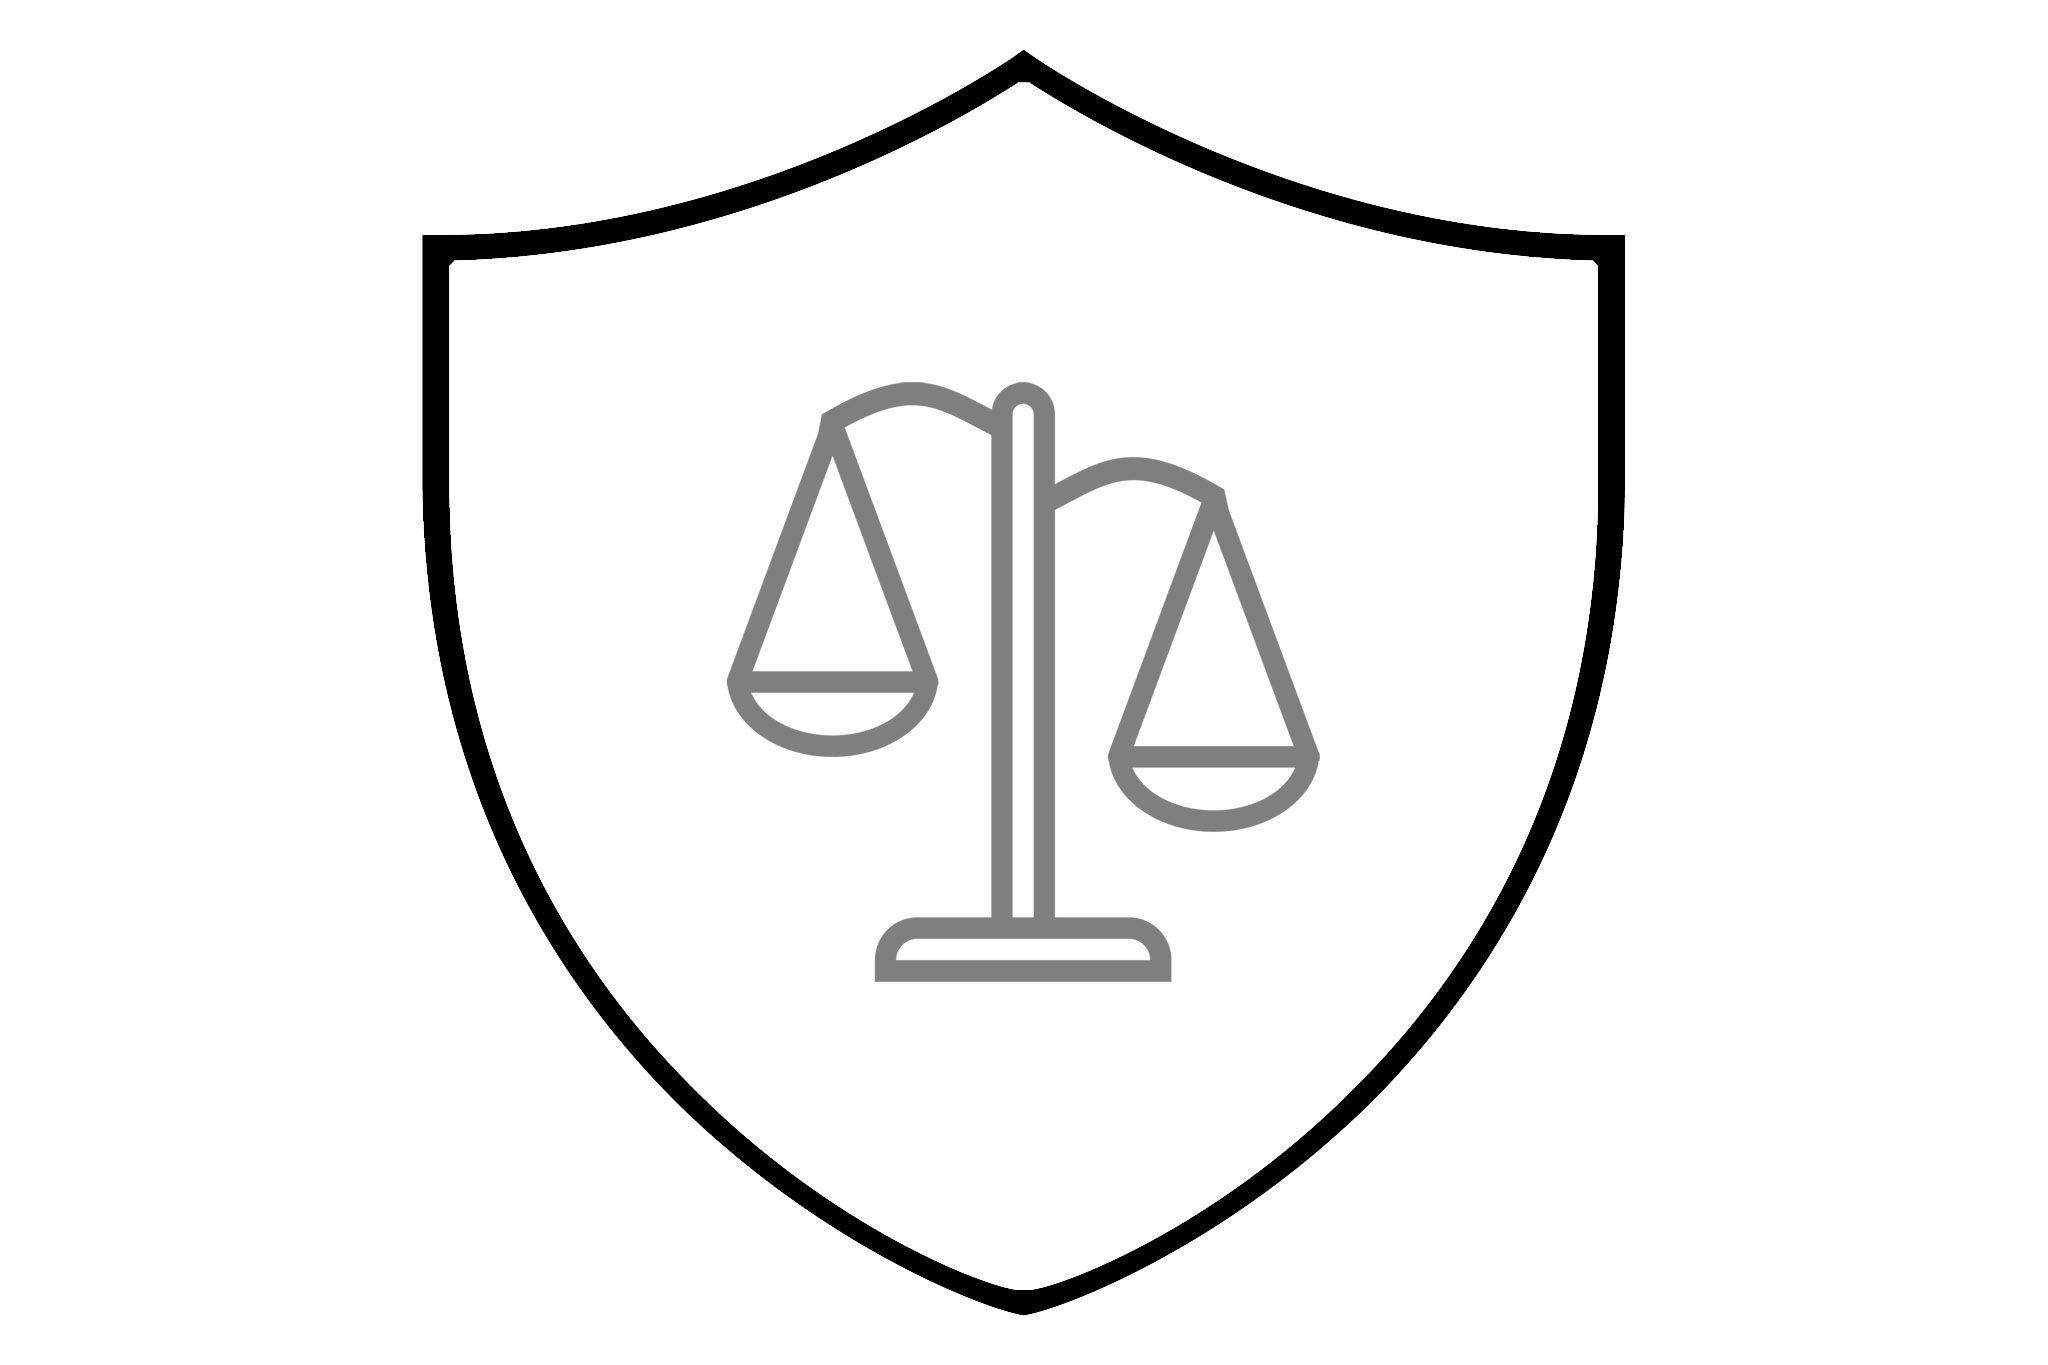 A stylized drawing of a shield with the scales of justice on it.